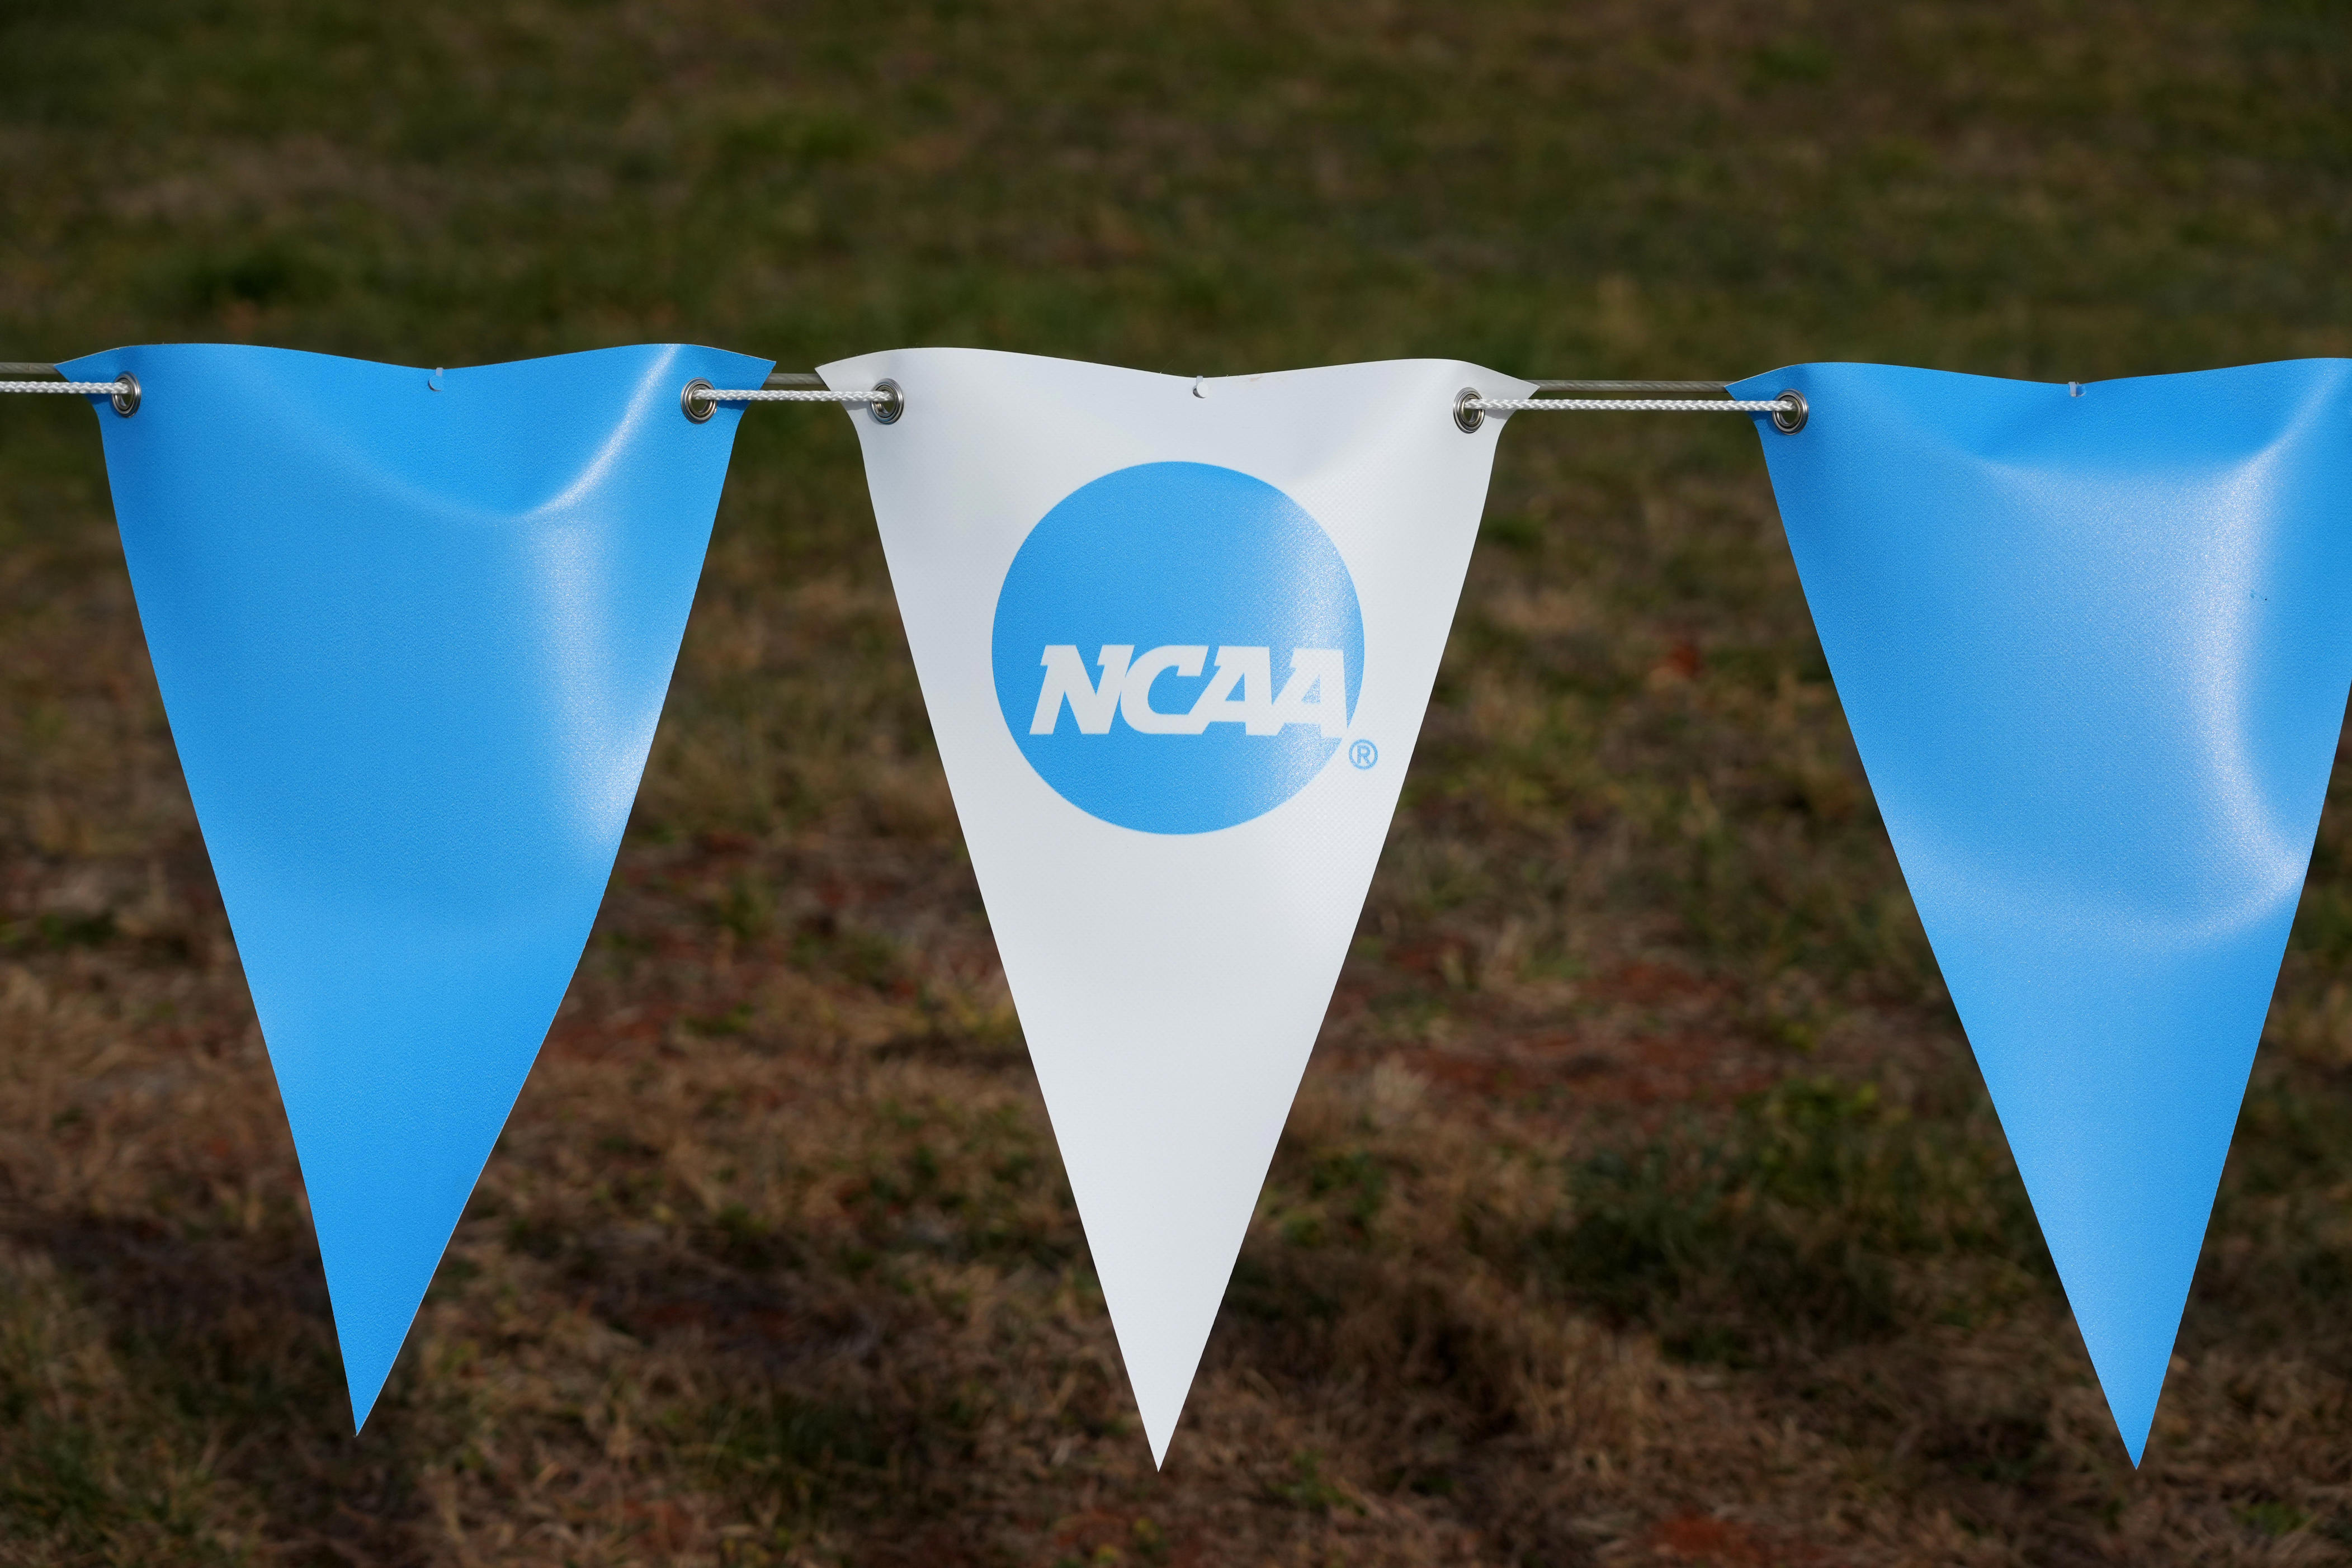 ncaa hit with another lawsuit, this time over prize money for college athletes